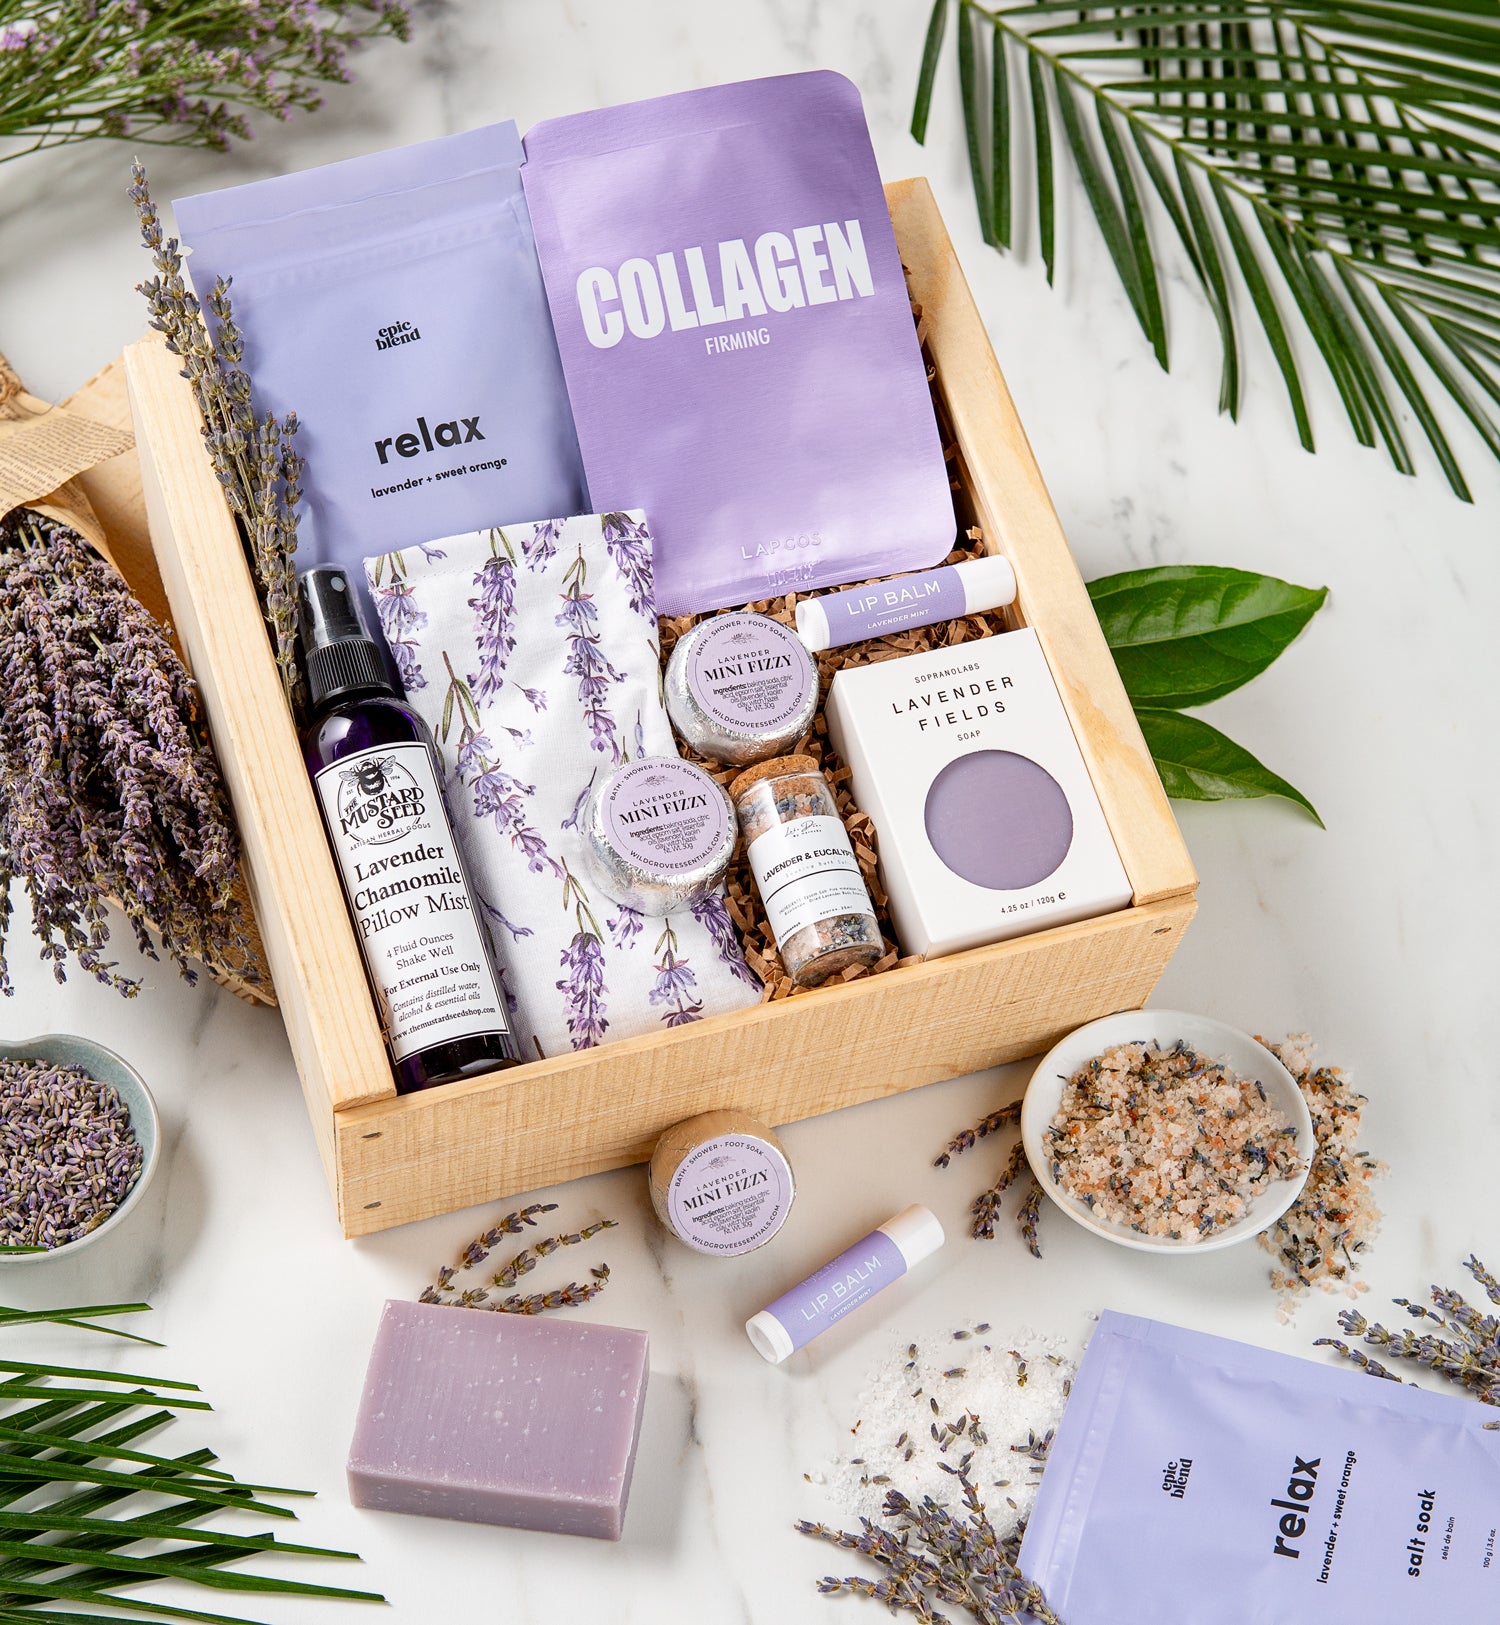 A variety of lavender-scented spa products is packed into a lovely wooden crate.